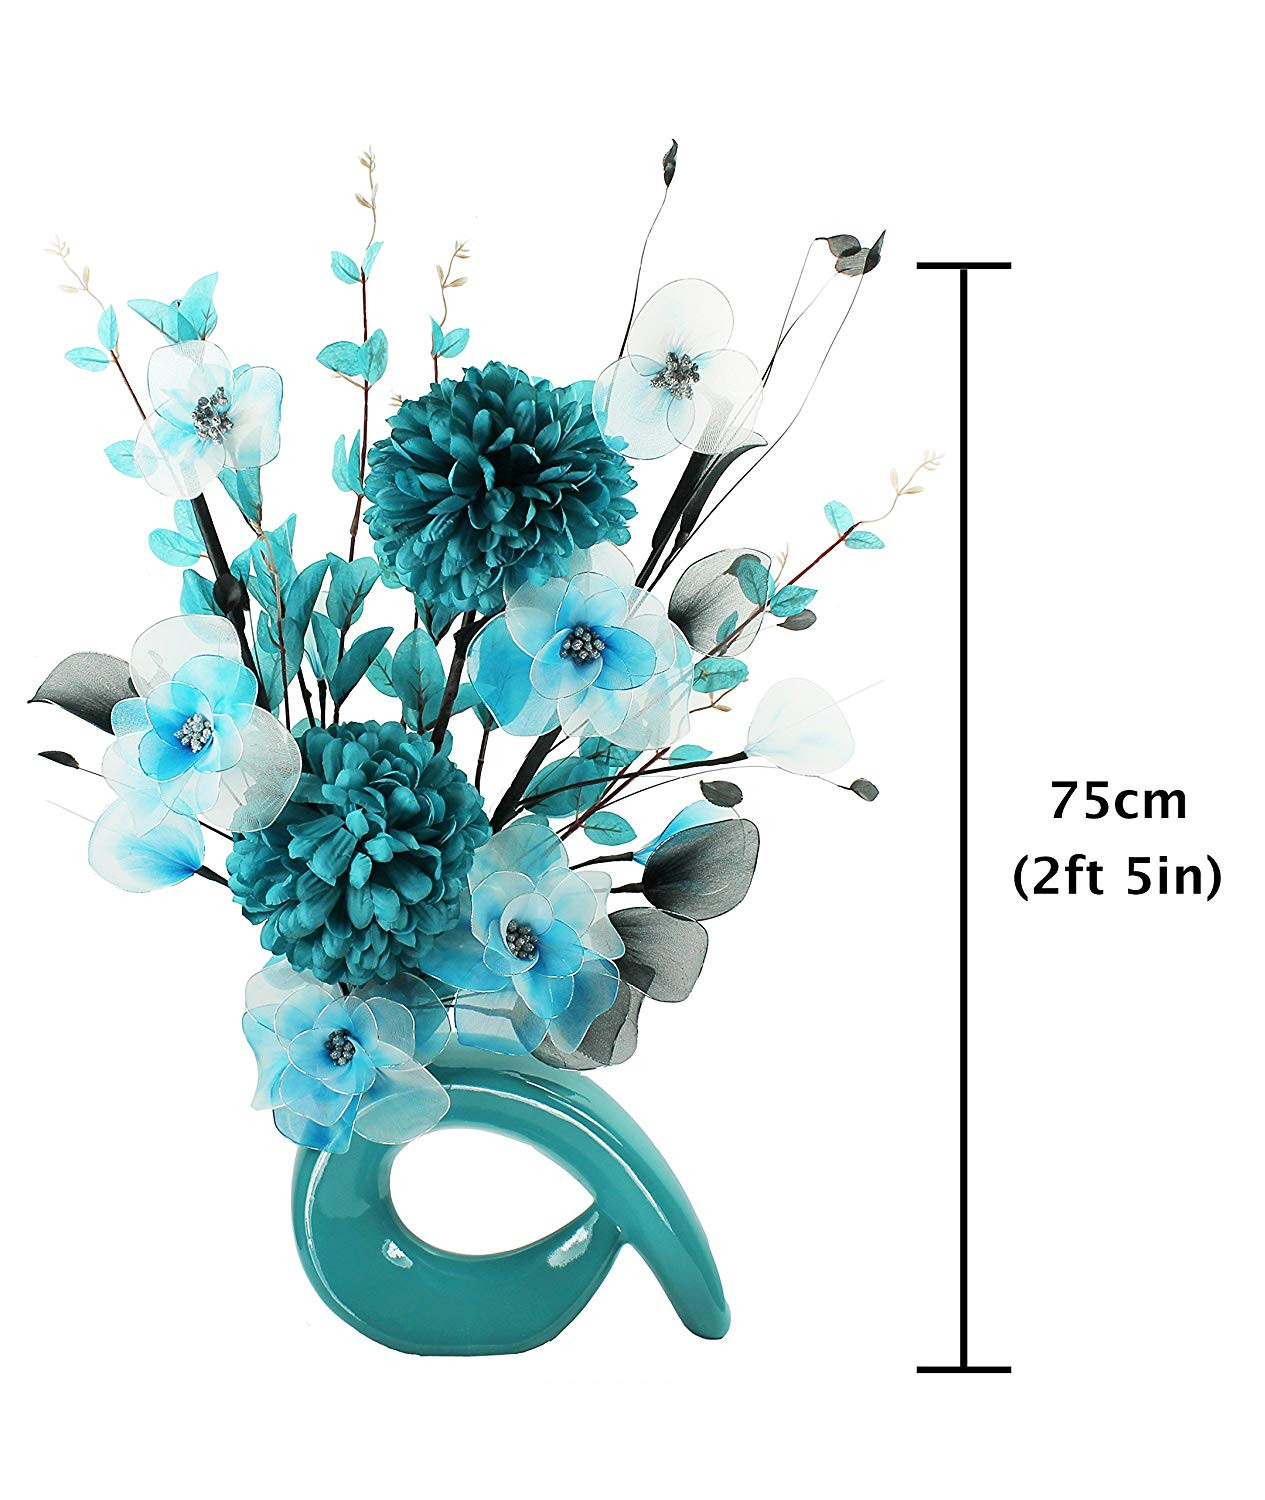 27 Lovely Small Navy Blue Vase 2024 free download small navy blue vase of turquoise blue vase with teal blue and white artificial flowers intended for turquoise blue vase with teal blue and white artificial flowers ornaments for living room